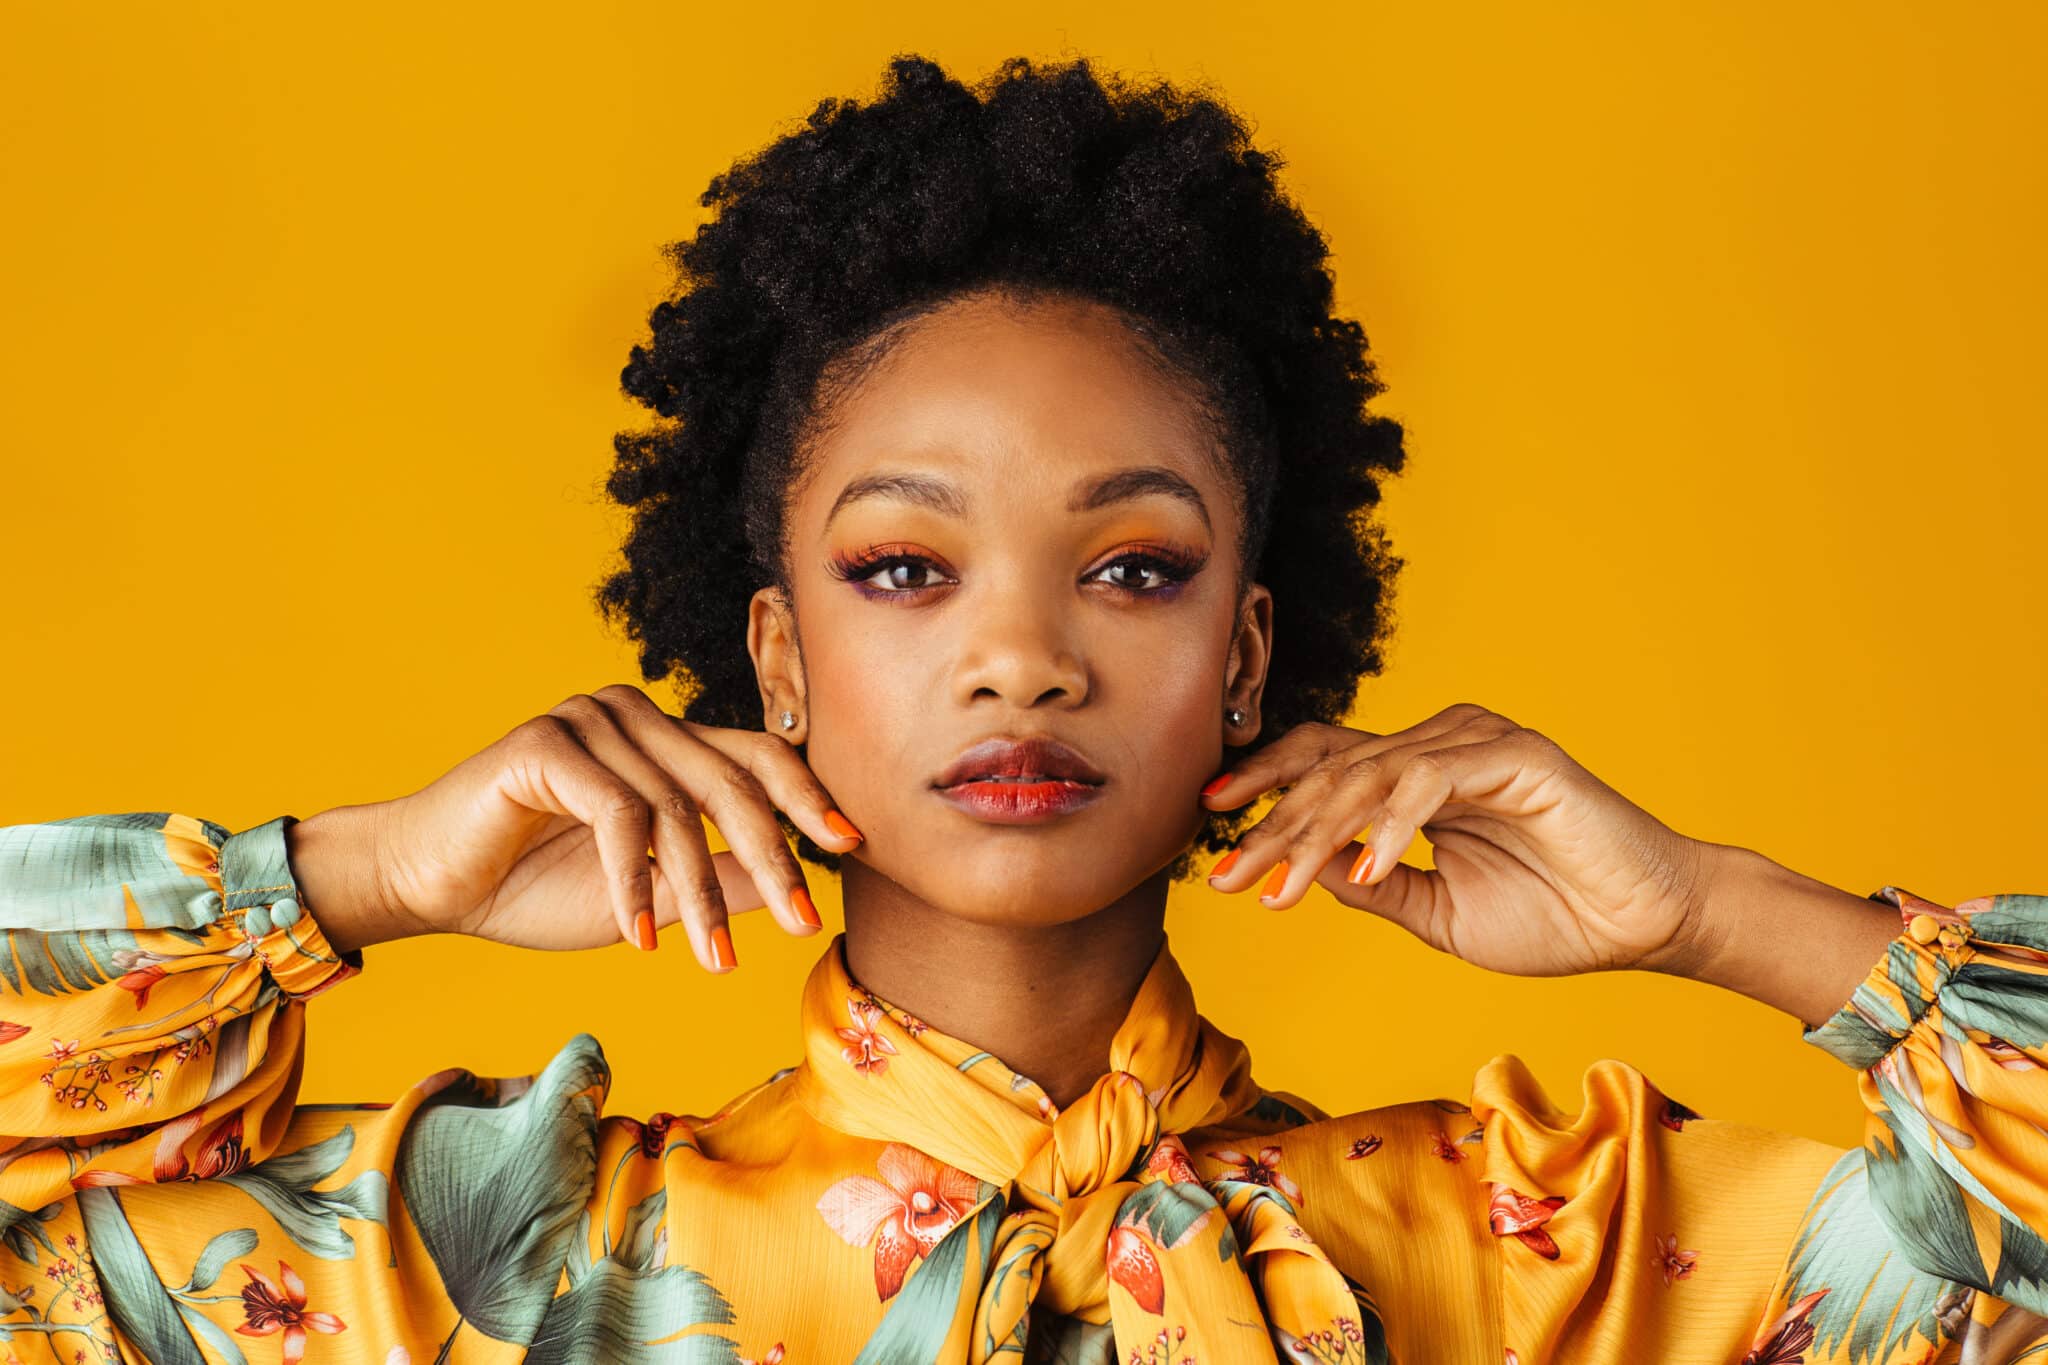 A woman with fresh hair poses confidently against a vibrant yellow background. She is wearing a yellow floral blouse and has her hands gently touching her neck, showcasing orange nails and matching eye makeup. She gazes directly at the camera with a calm expression that reflects her dedication to organic hair care.